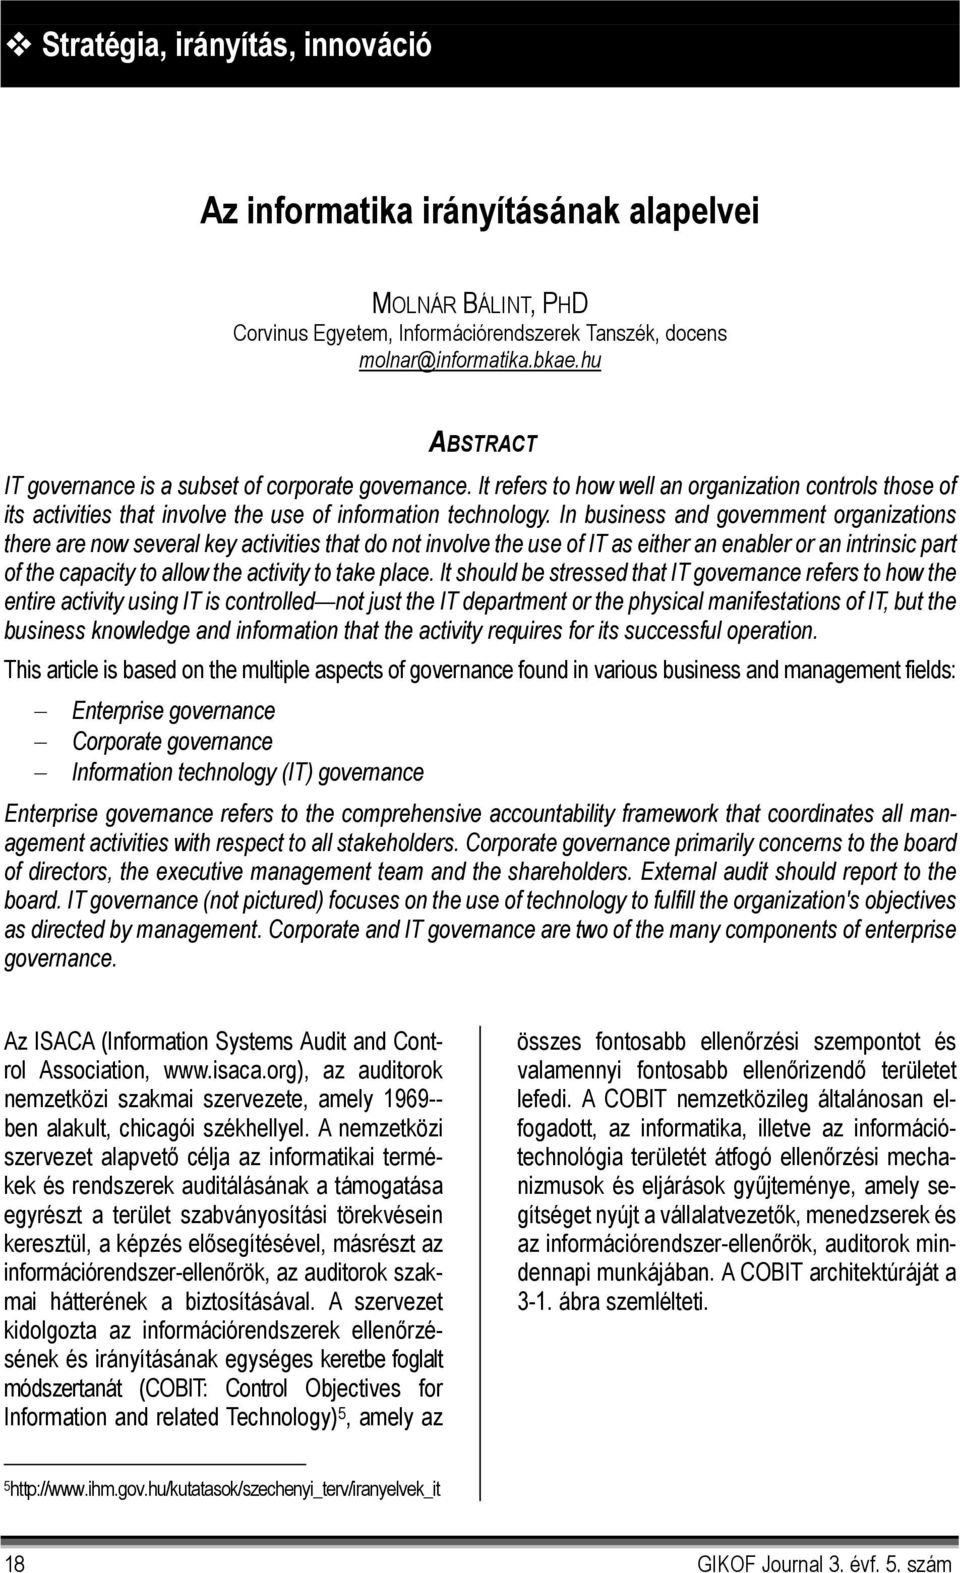 hu ABSTRACT IT governance is a subset of corporate governance. It refers to how well an organization controls those of its activities that involve the use of information technology.